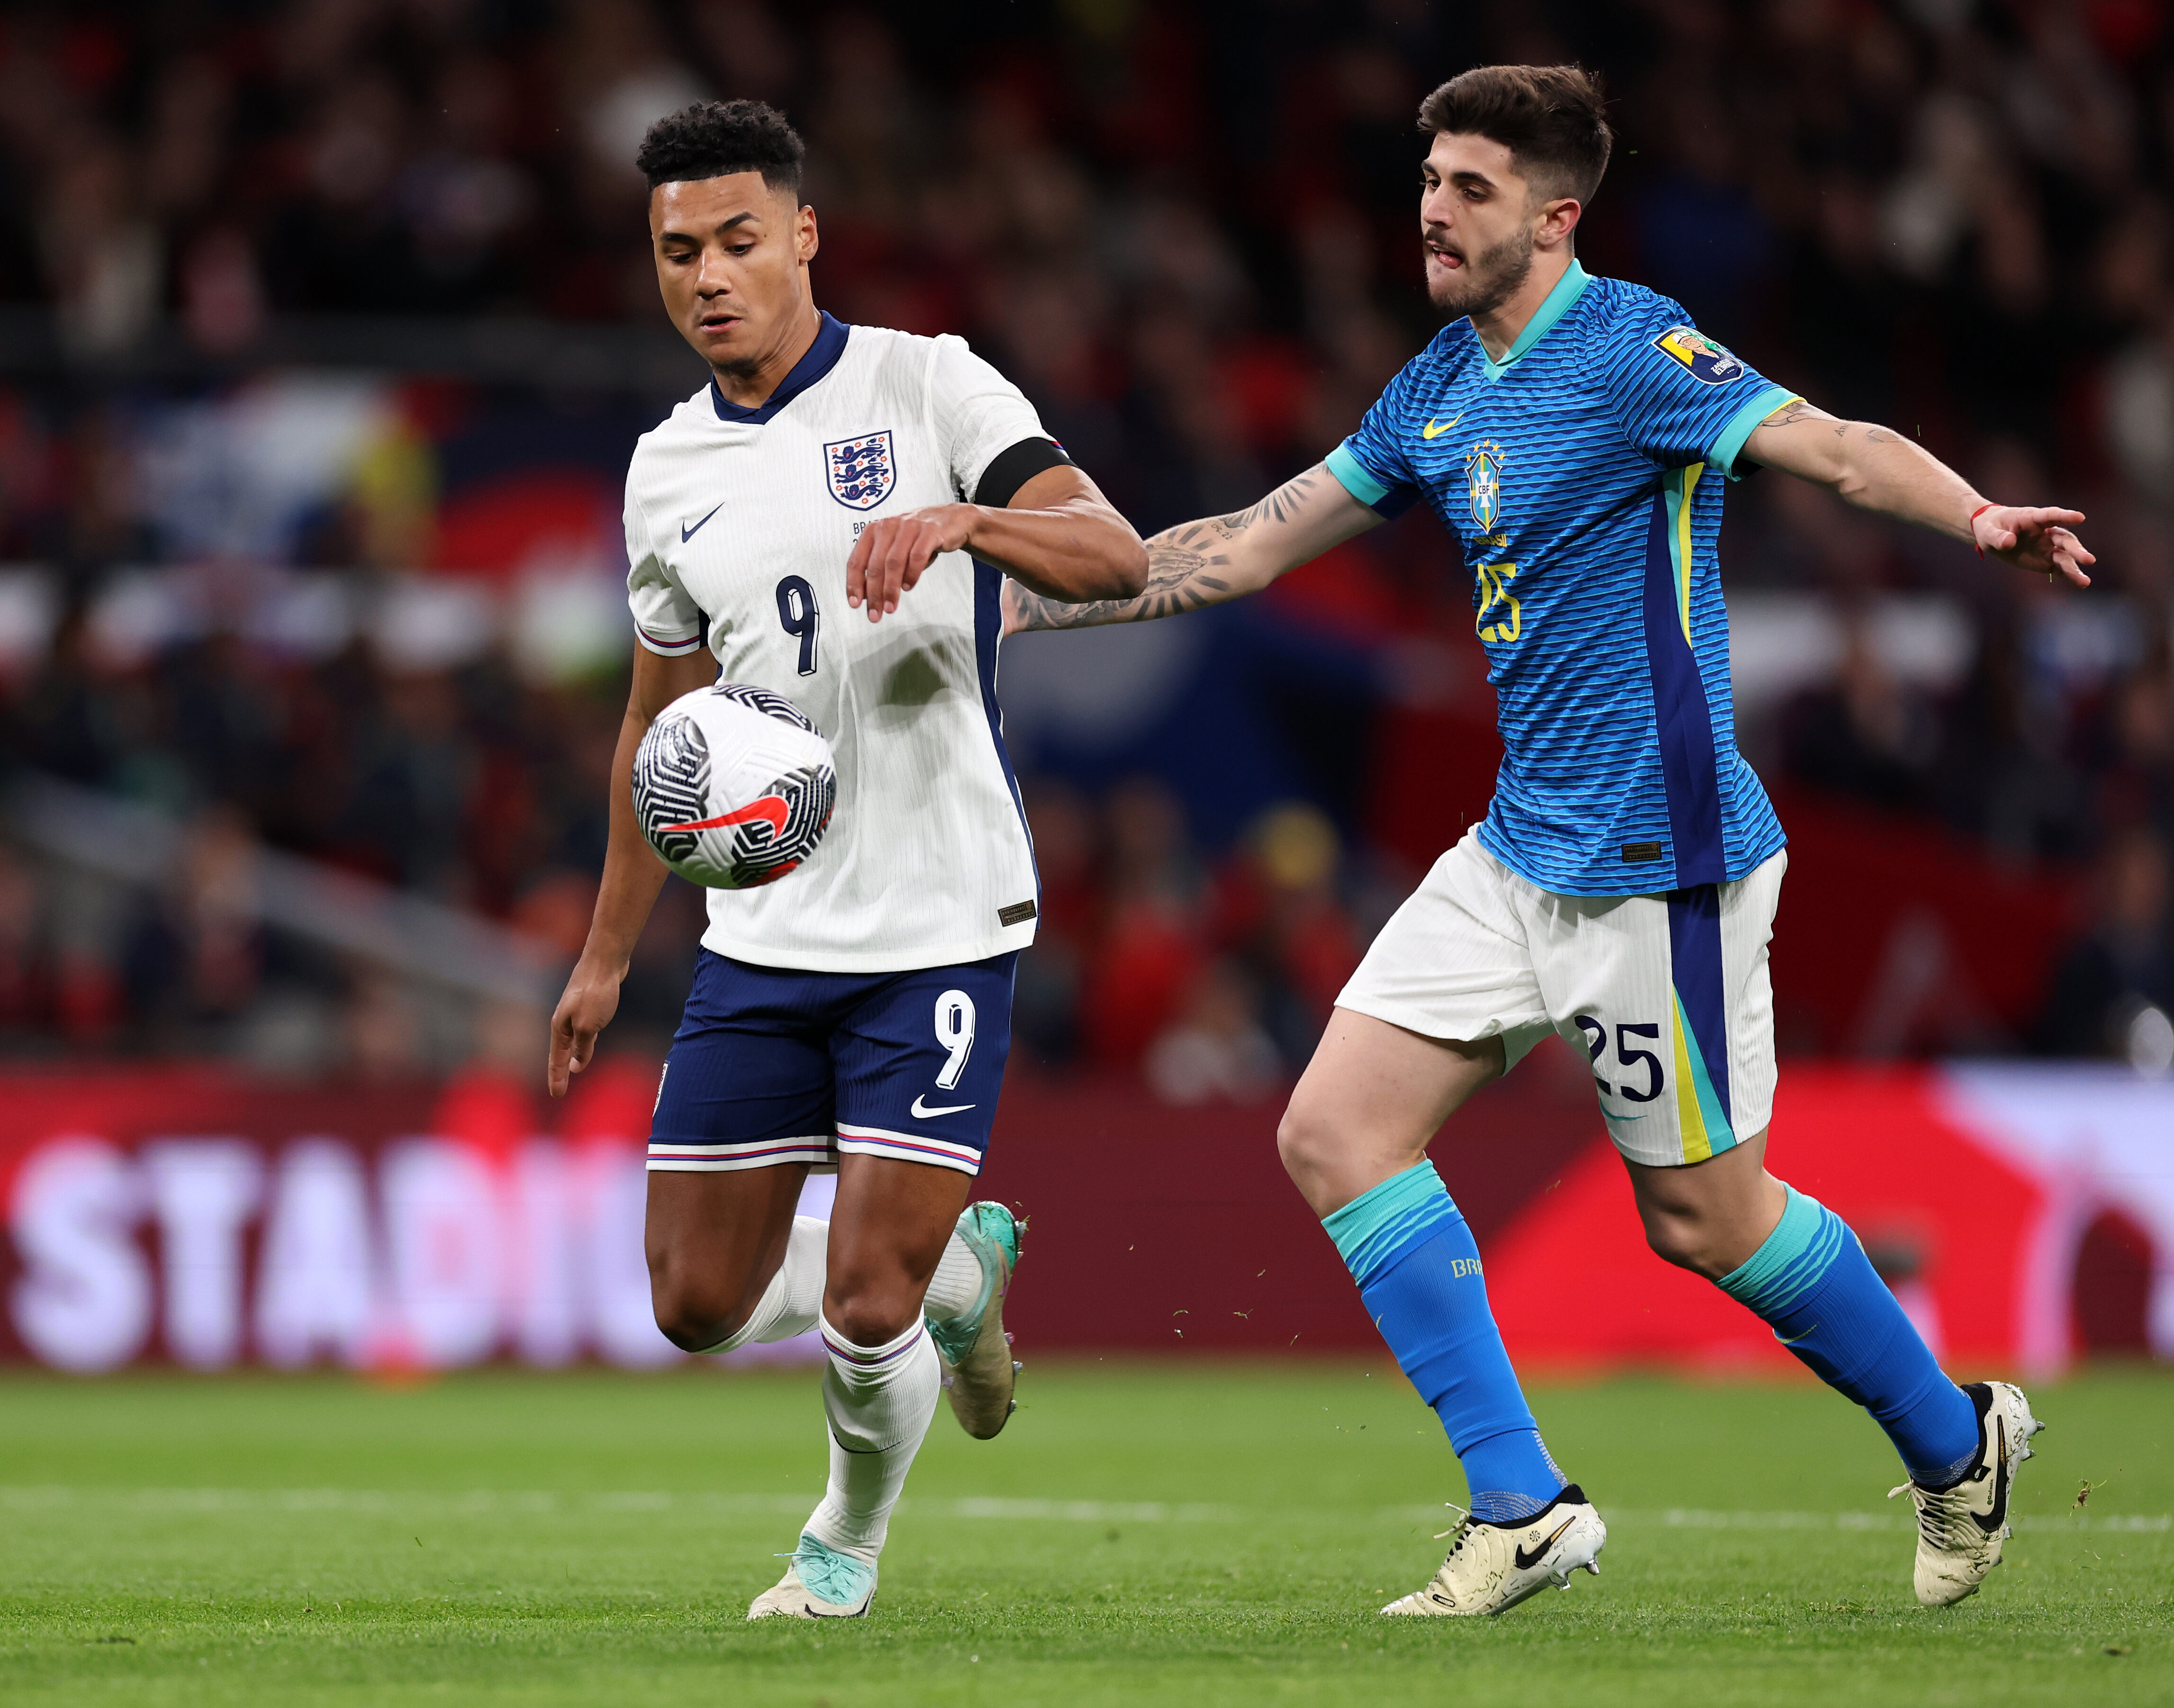 Watch: Ollie Watkins misses huge chance to put England ahead against Brazil